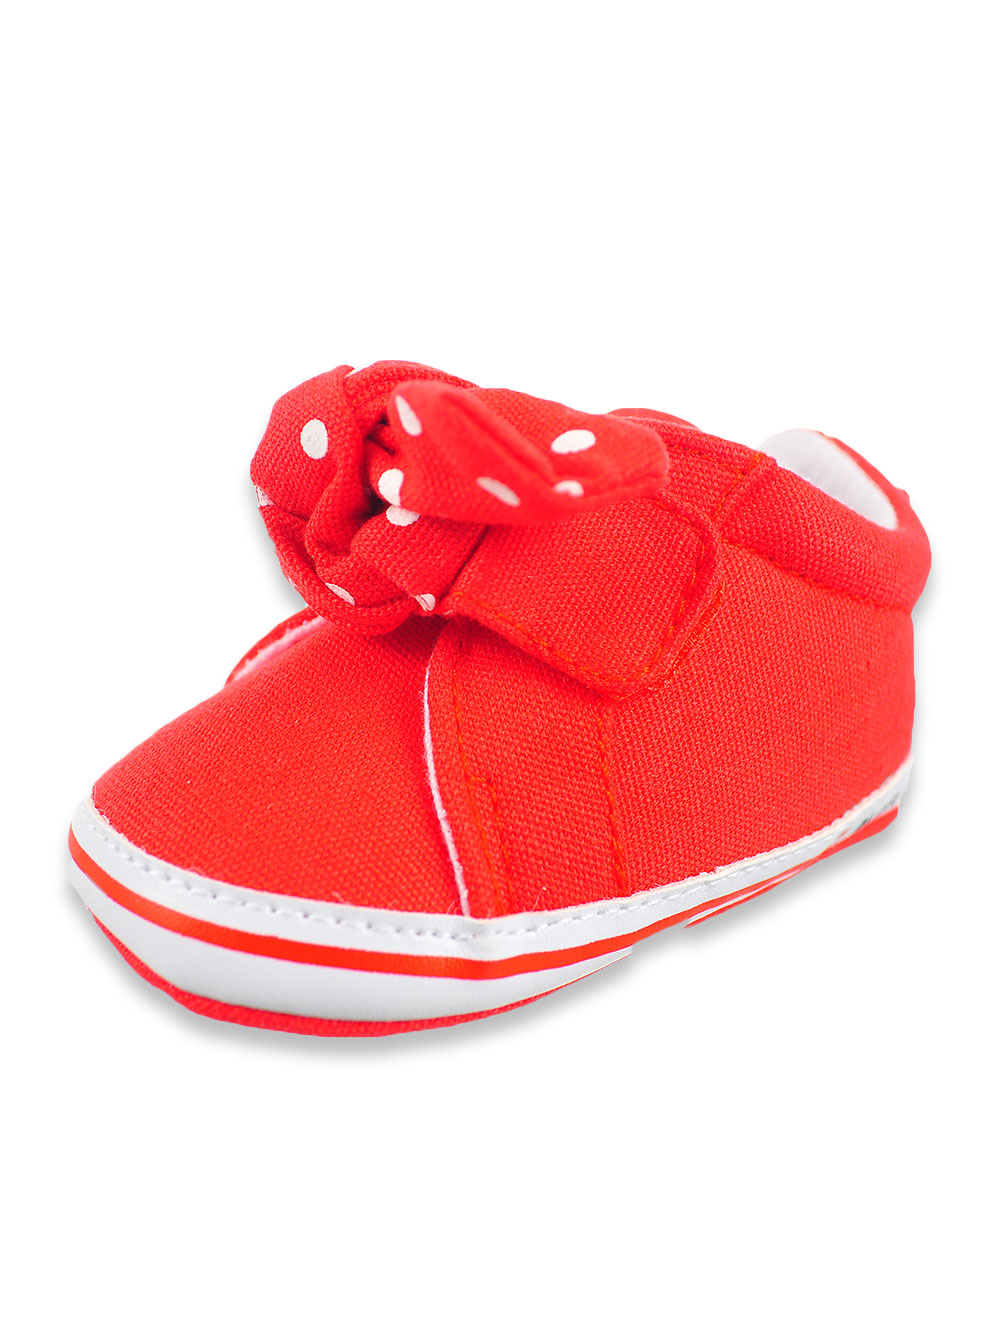 Girls Red Sneakers